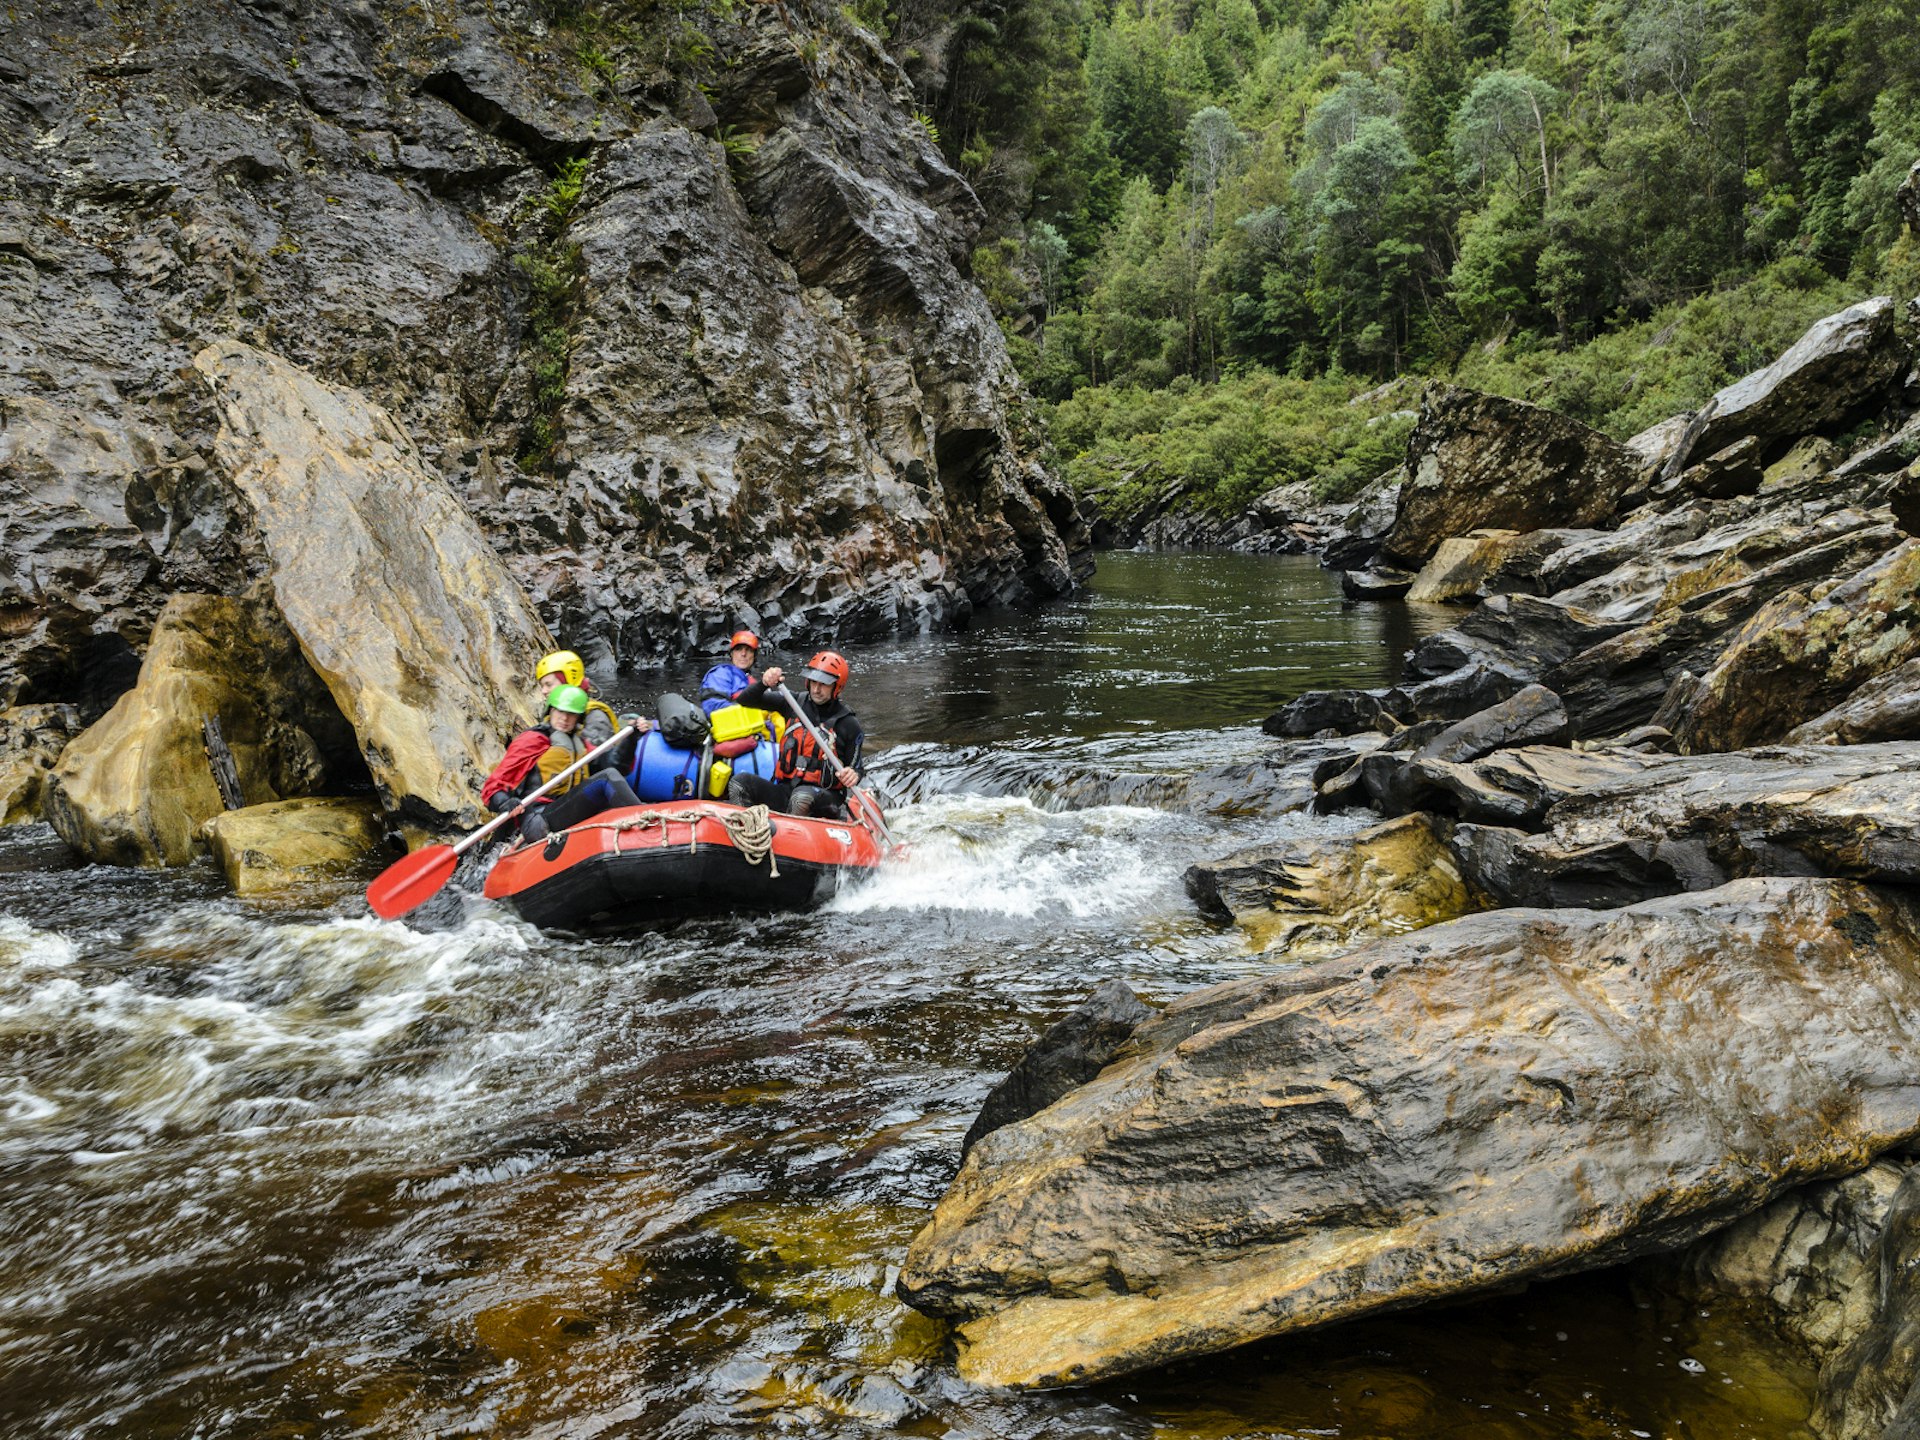 A group of people raft down choppy waters of the Franklin River, Tasmania